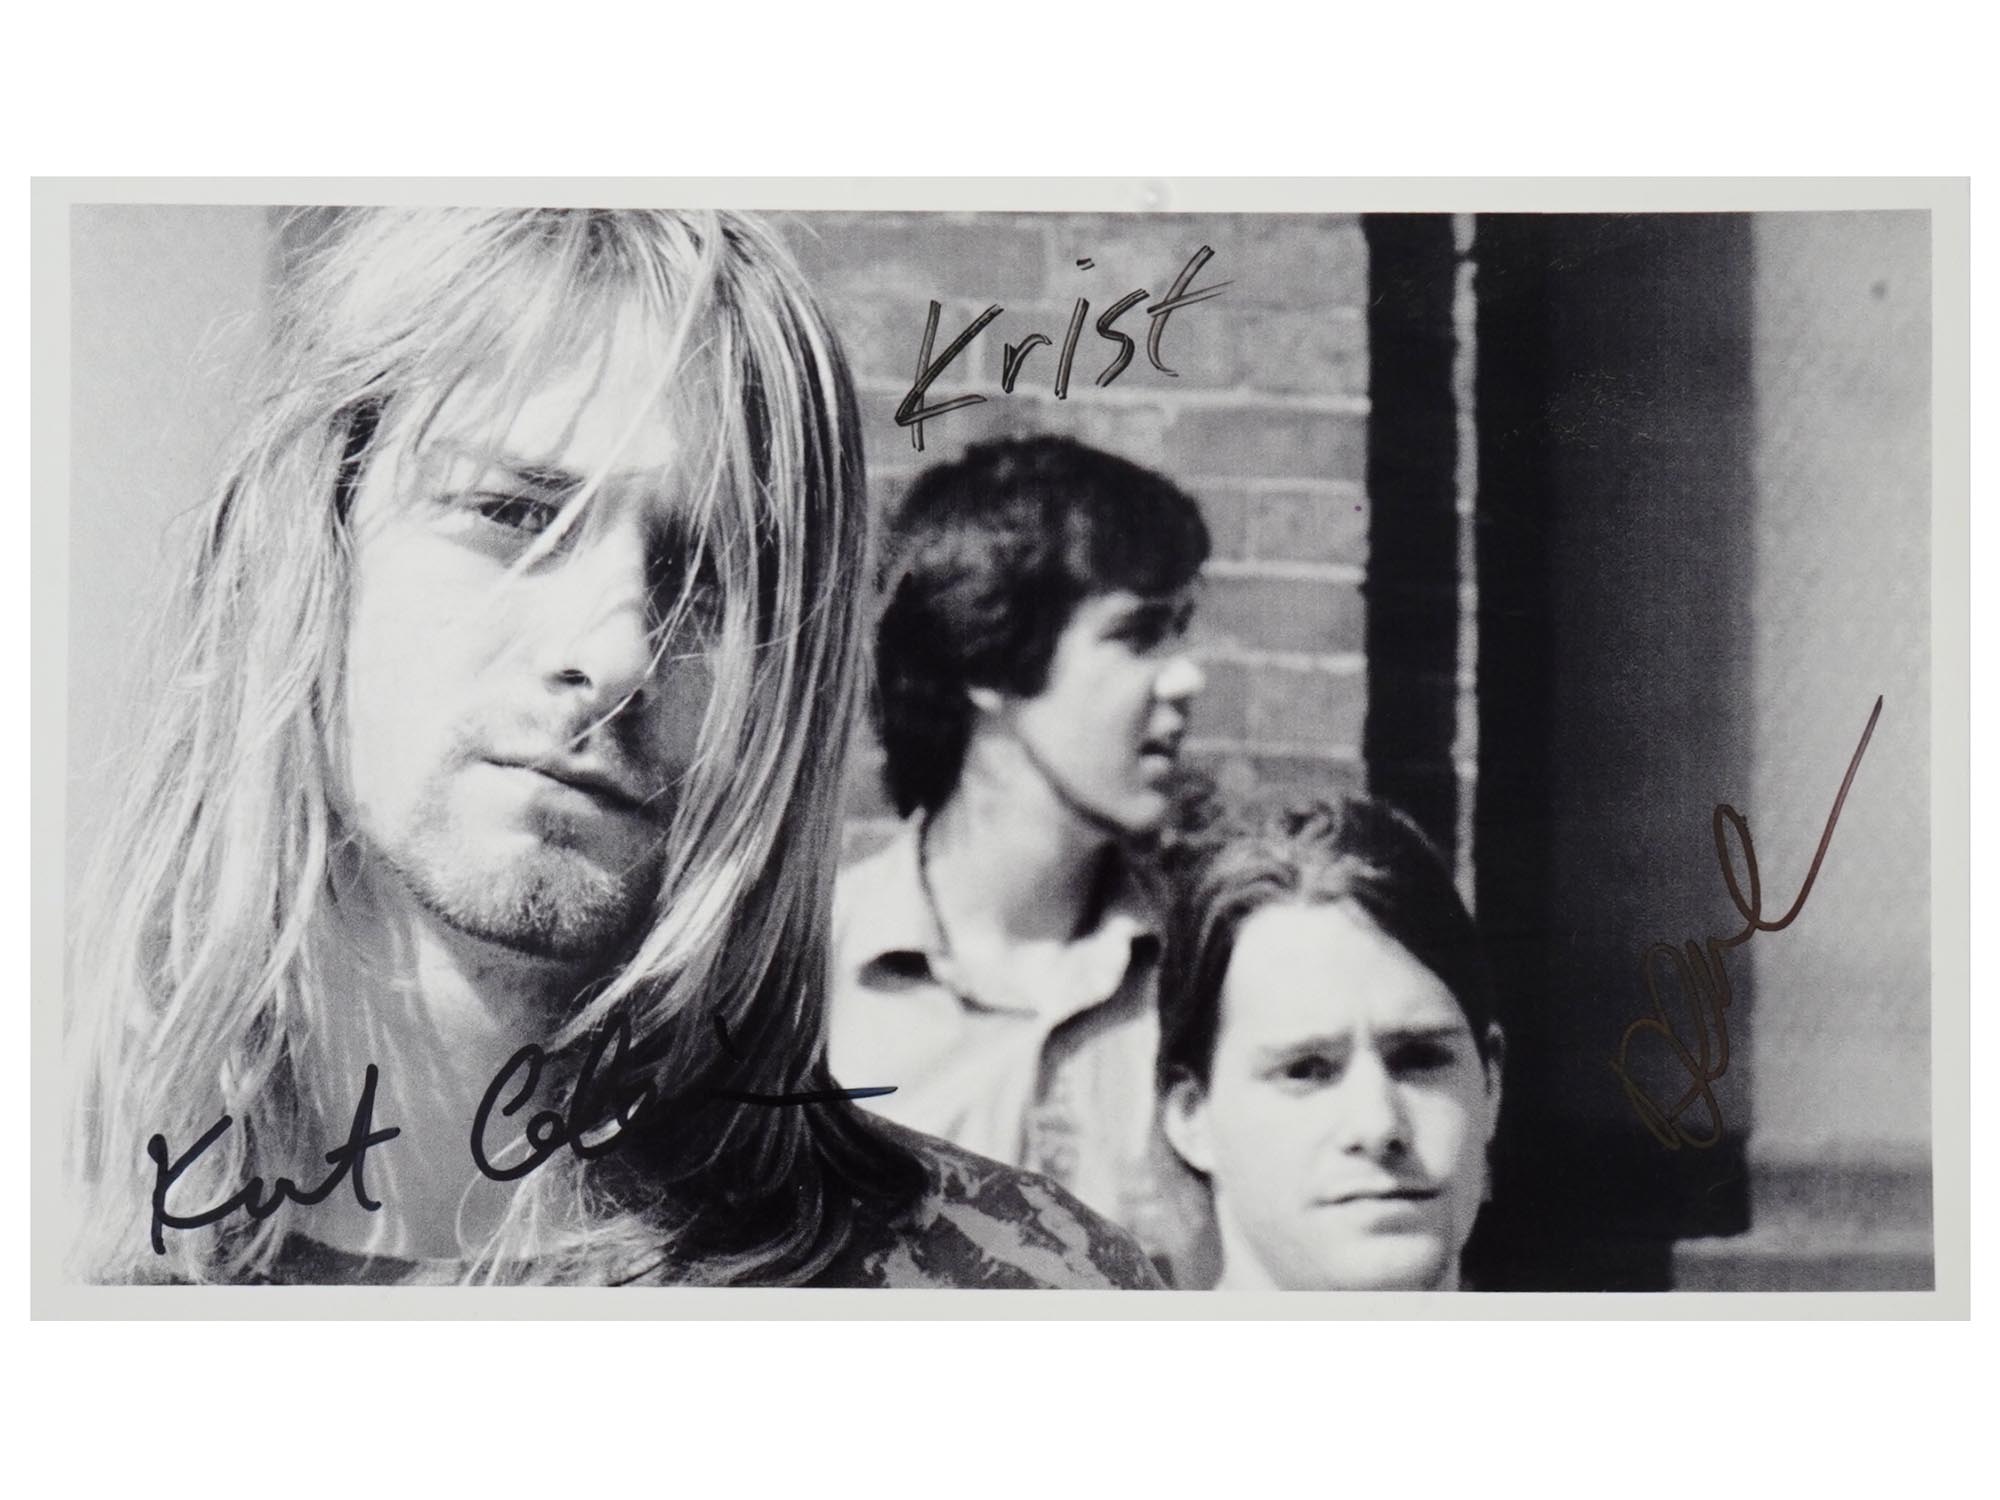 ORIGINAL PORTRAIT PHOTO SIGNED BY NIRVANA BAND COBAIN PIC-0